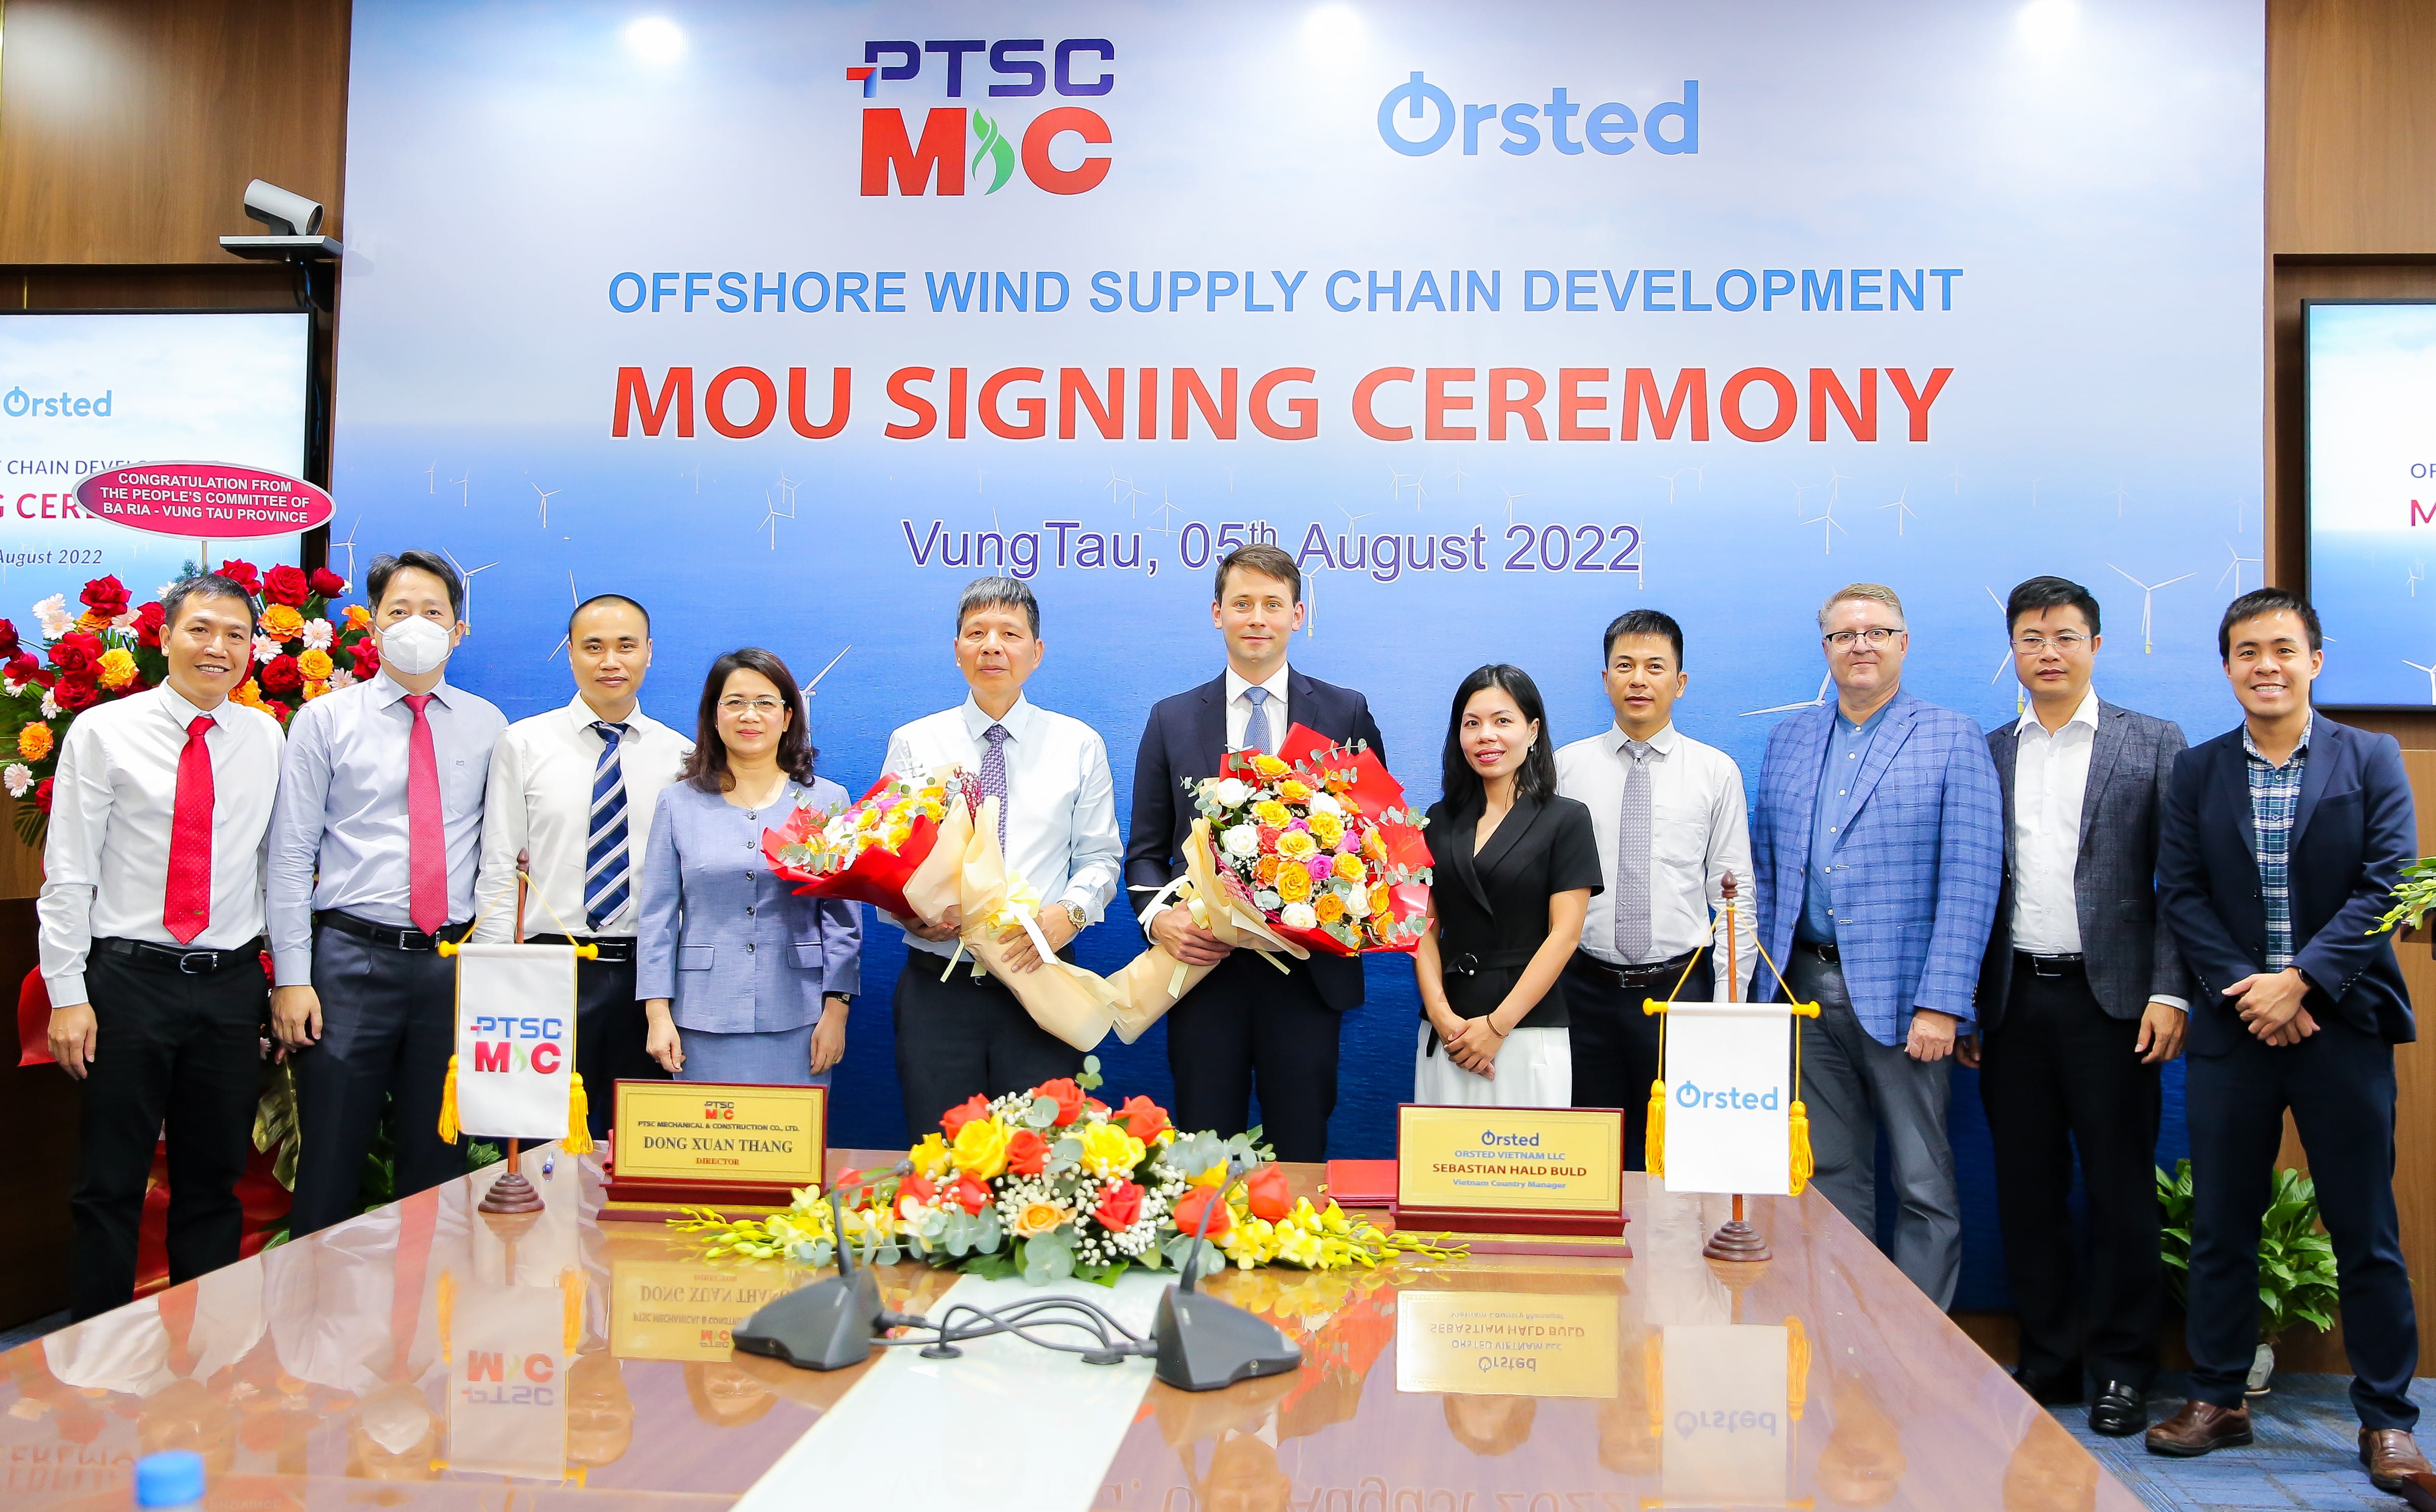 Mr. Dong Xuan Thang, Managing Director of PTSC M&C and Mr. Sebastian Hald Buhl, Country Manager of Ørsted Vietnam sign the agreement accompanied by Mr. Troels Jakobsen, Charge D’affaire Embassy of Denmark, Ms. Vu Bich Hao, Deputy Director of Baria-Vungtau Department of Industry and Trade, Mr. Dinh Van Cong, Head of Project Development Energy Management Division, T&T Group plus members of their respective teams.